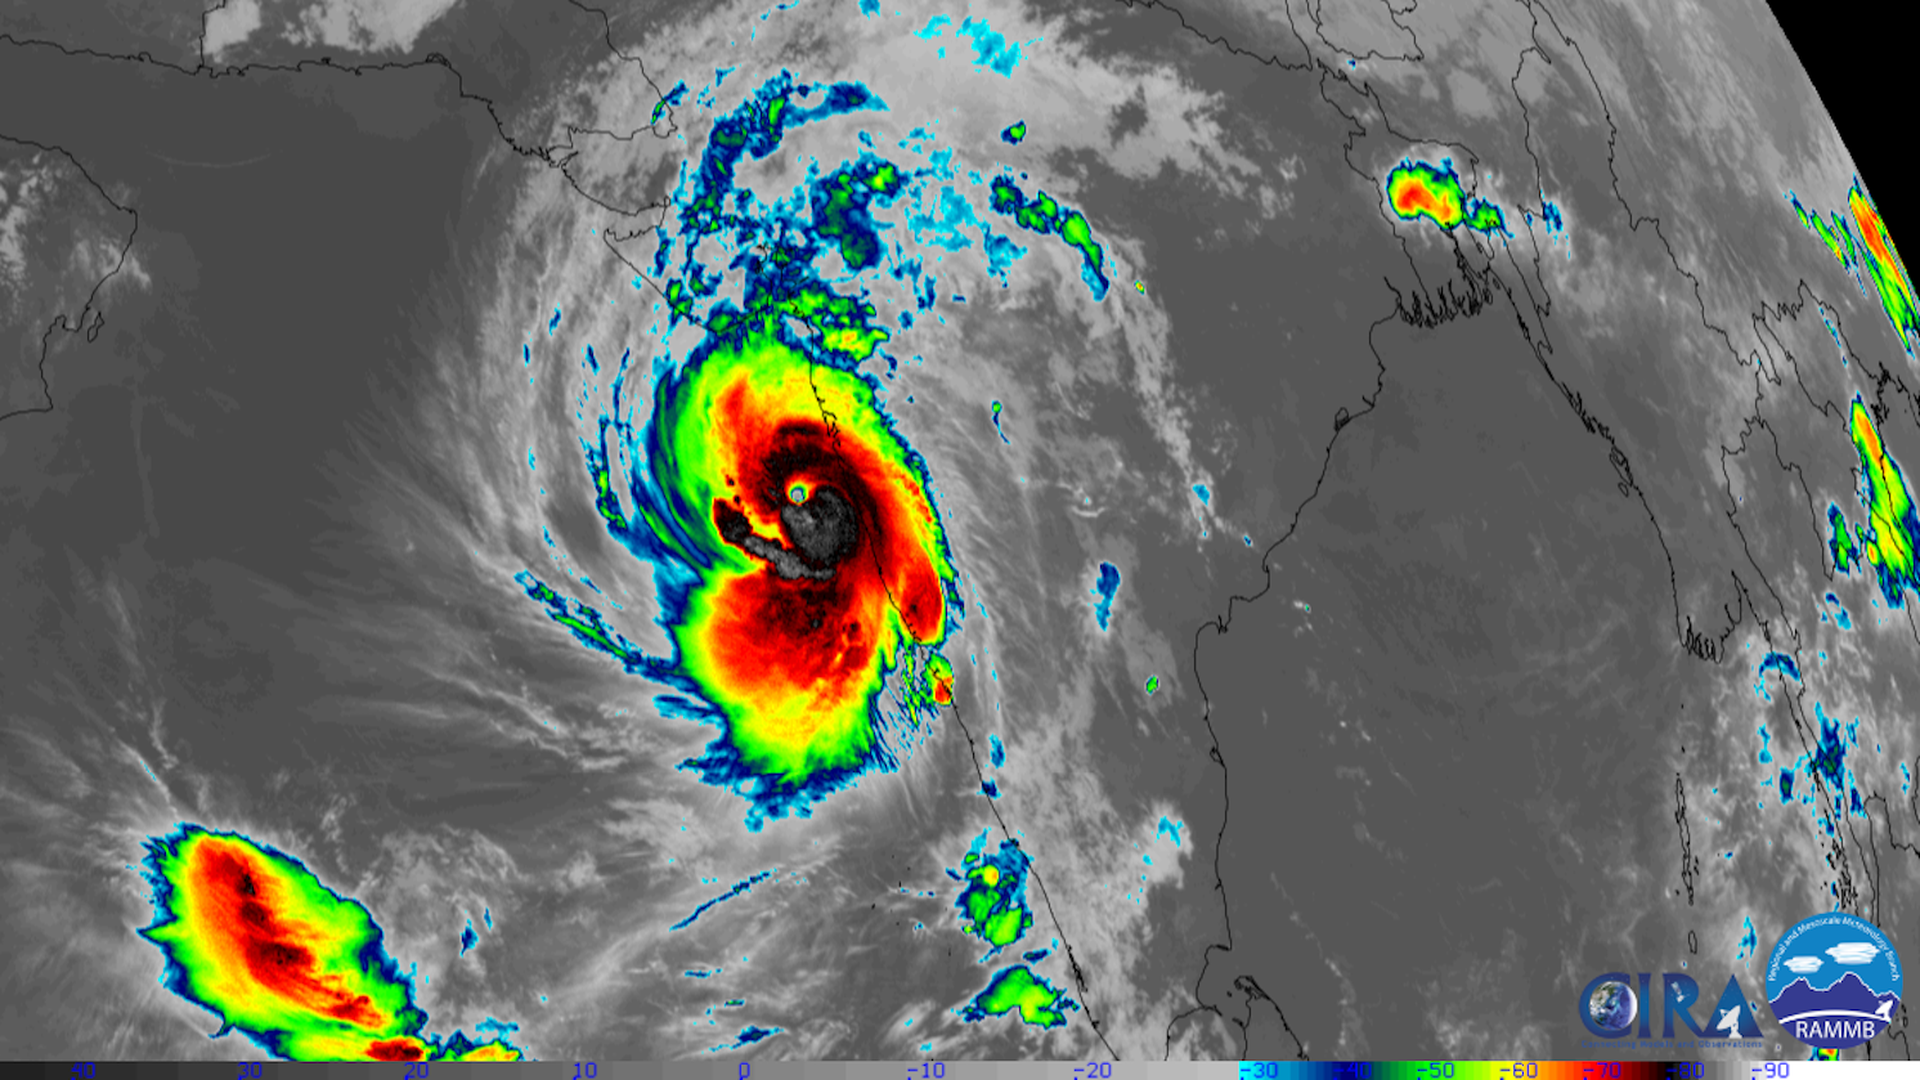 Satellite image showing a tropical cyclone with an eye moving along west coast of India.